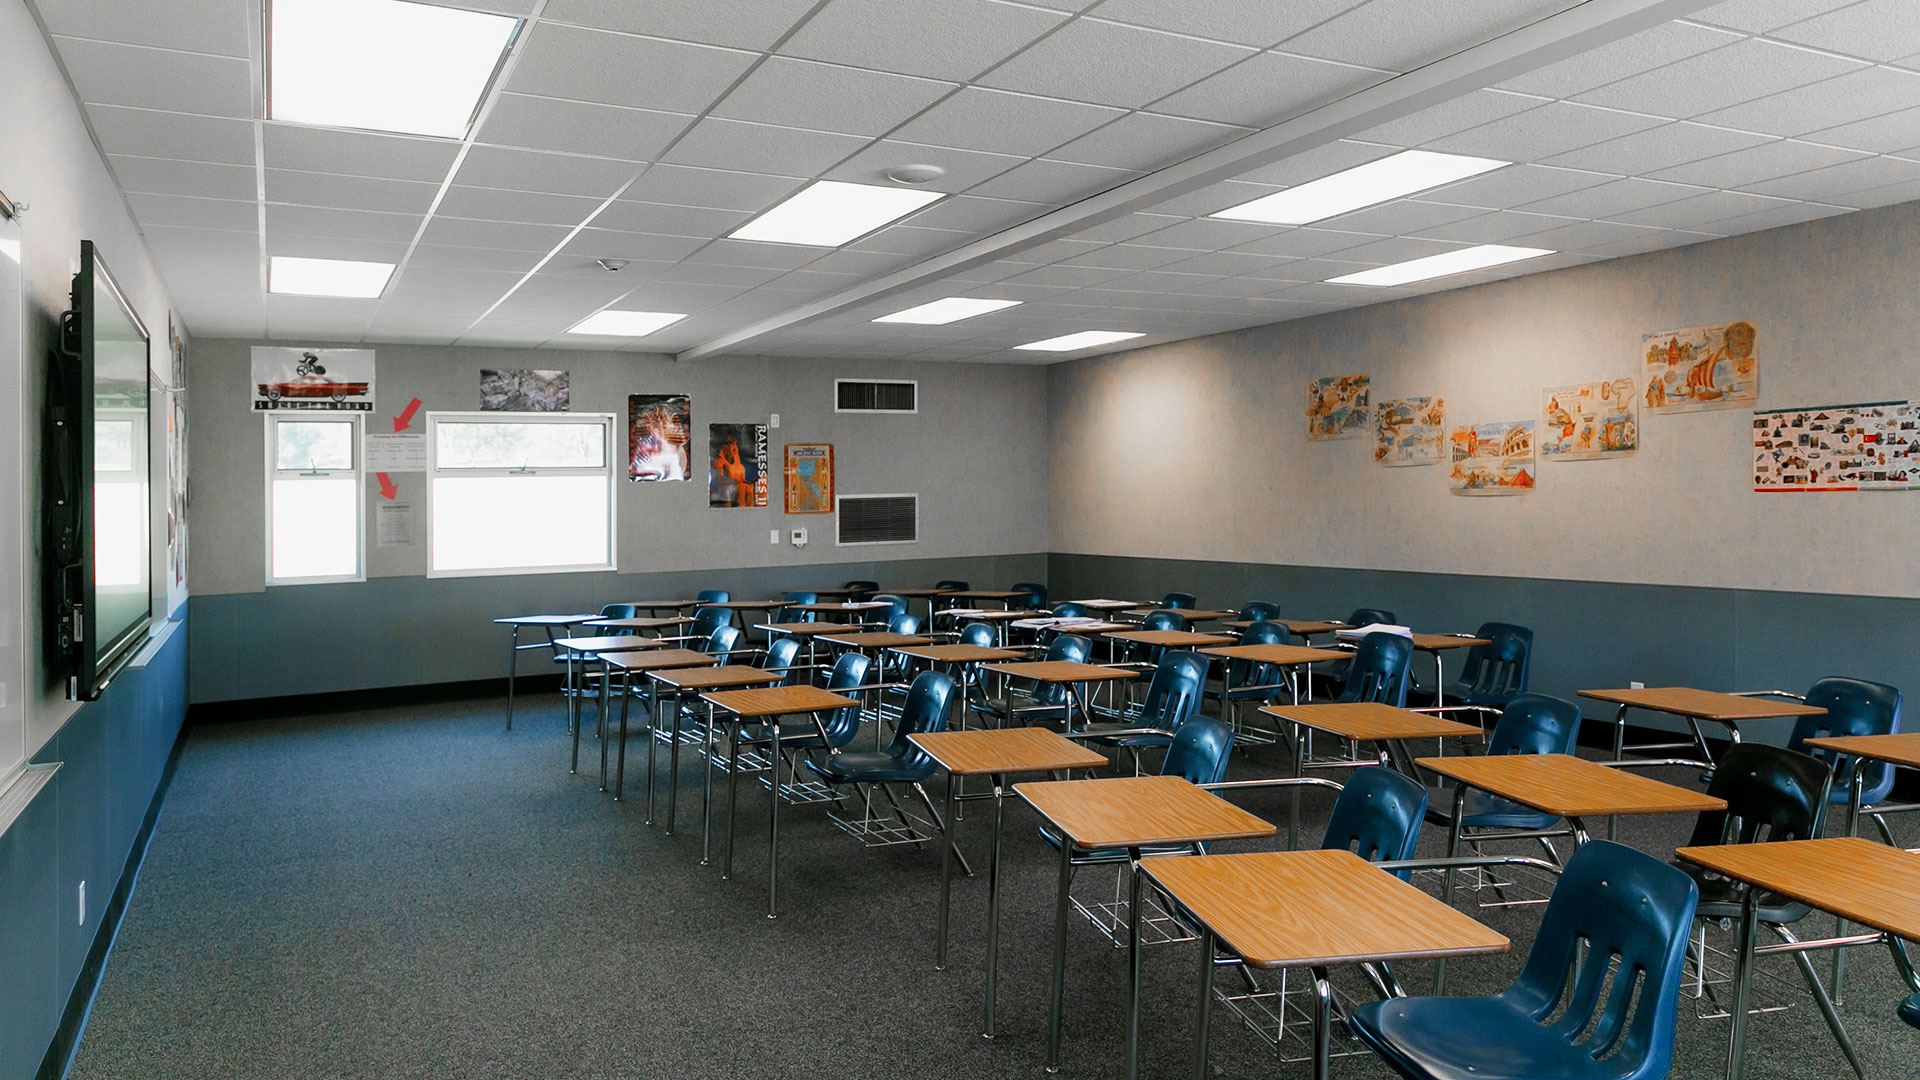 Renovated portable classroom interior, with bright windows, desks, and a teaching area.